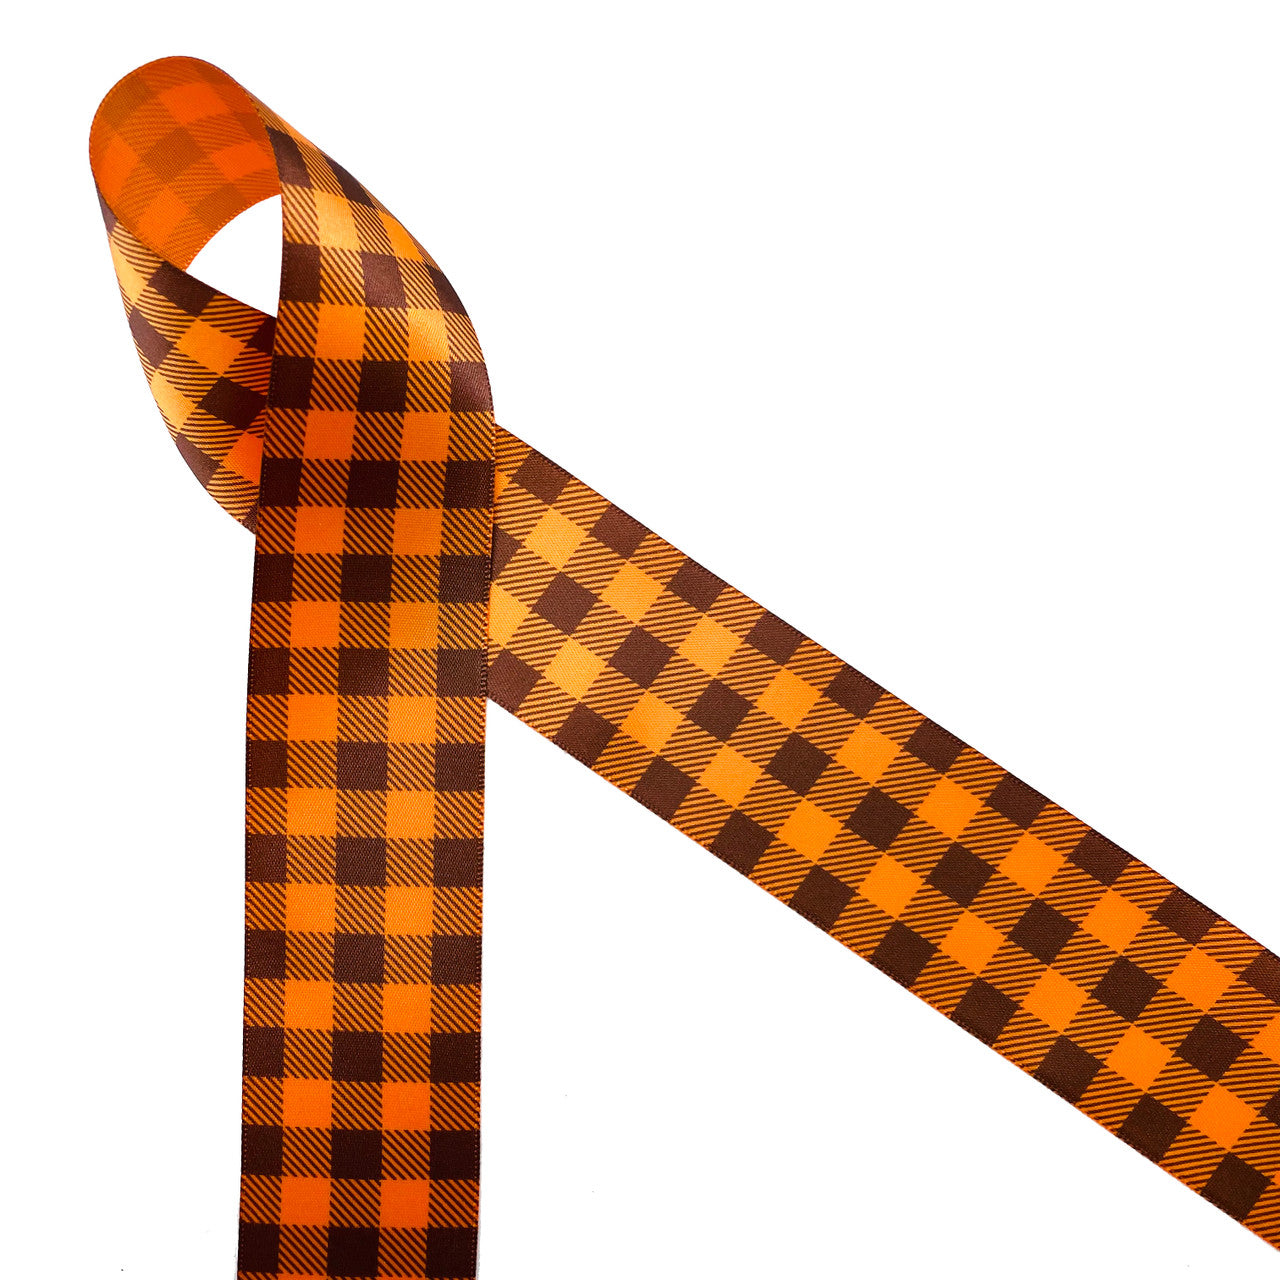 Gingham check in brown and orange printed on 1.5" tangerine single face satin ribbon is a Fall classic! This traditional plaid is ideal for Fall decor, wreath making, gift wrap, sewing, quilting and craft projects! Be sure to have this ribbon on hand for hair bows, head bands and hat bands to celebrate Autumn! All our ribbon is designed and printed in the USA